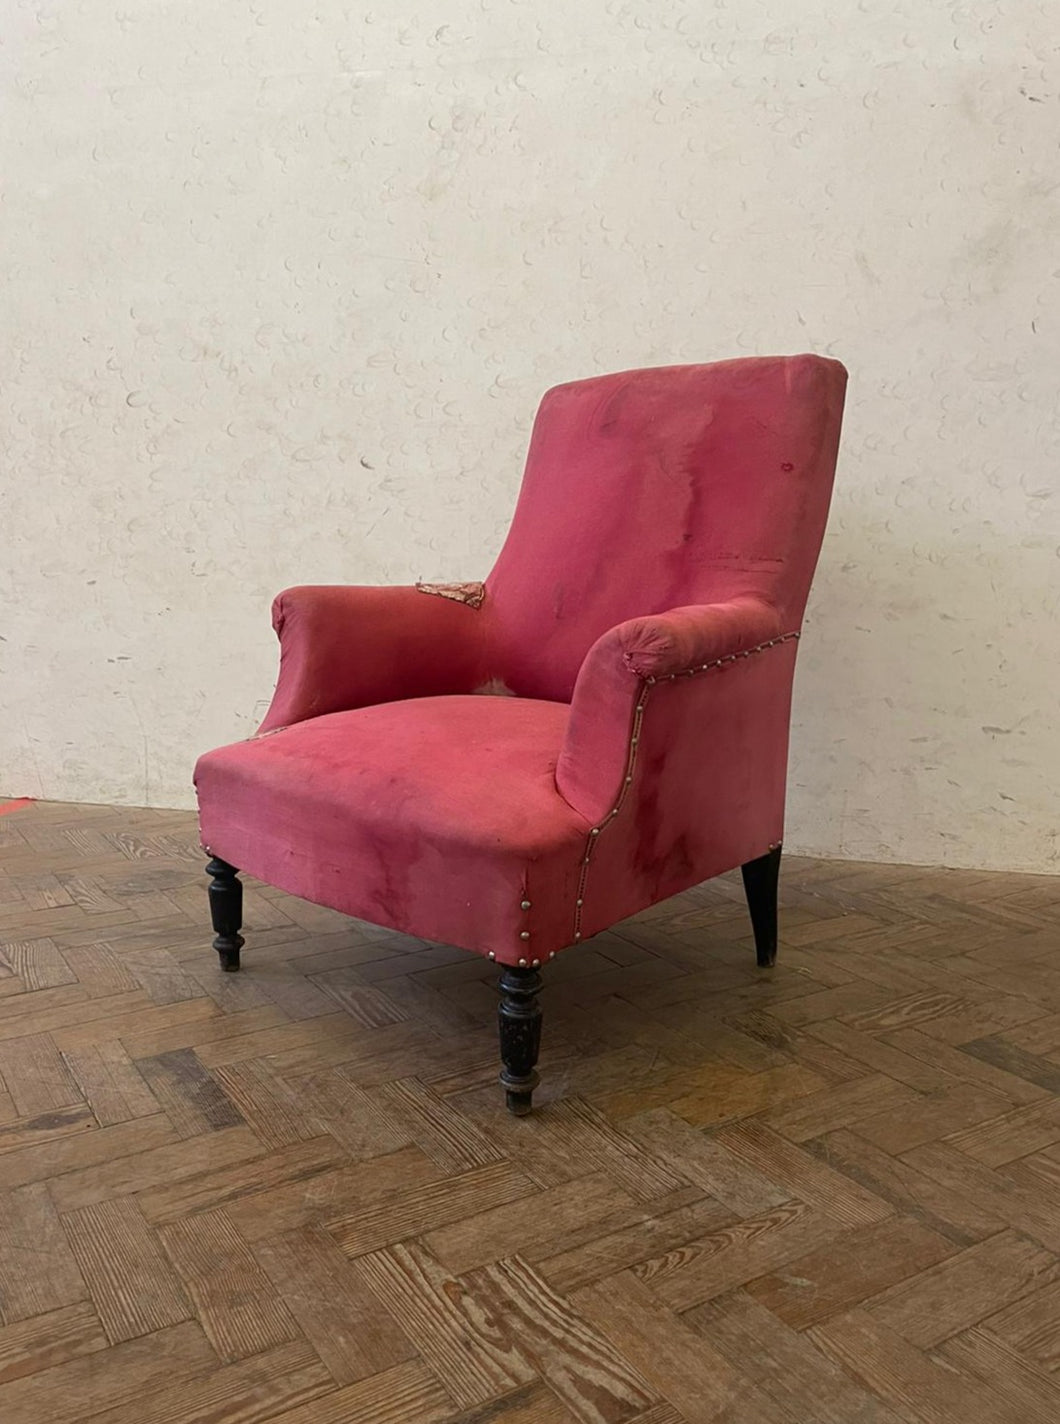 Antique French Arm Chair - Pink